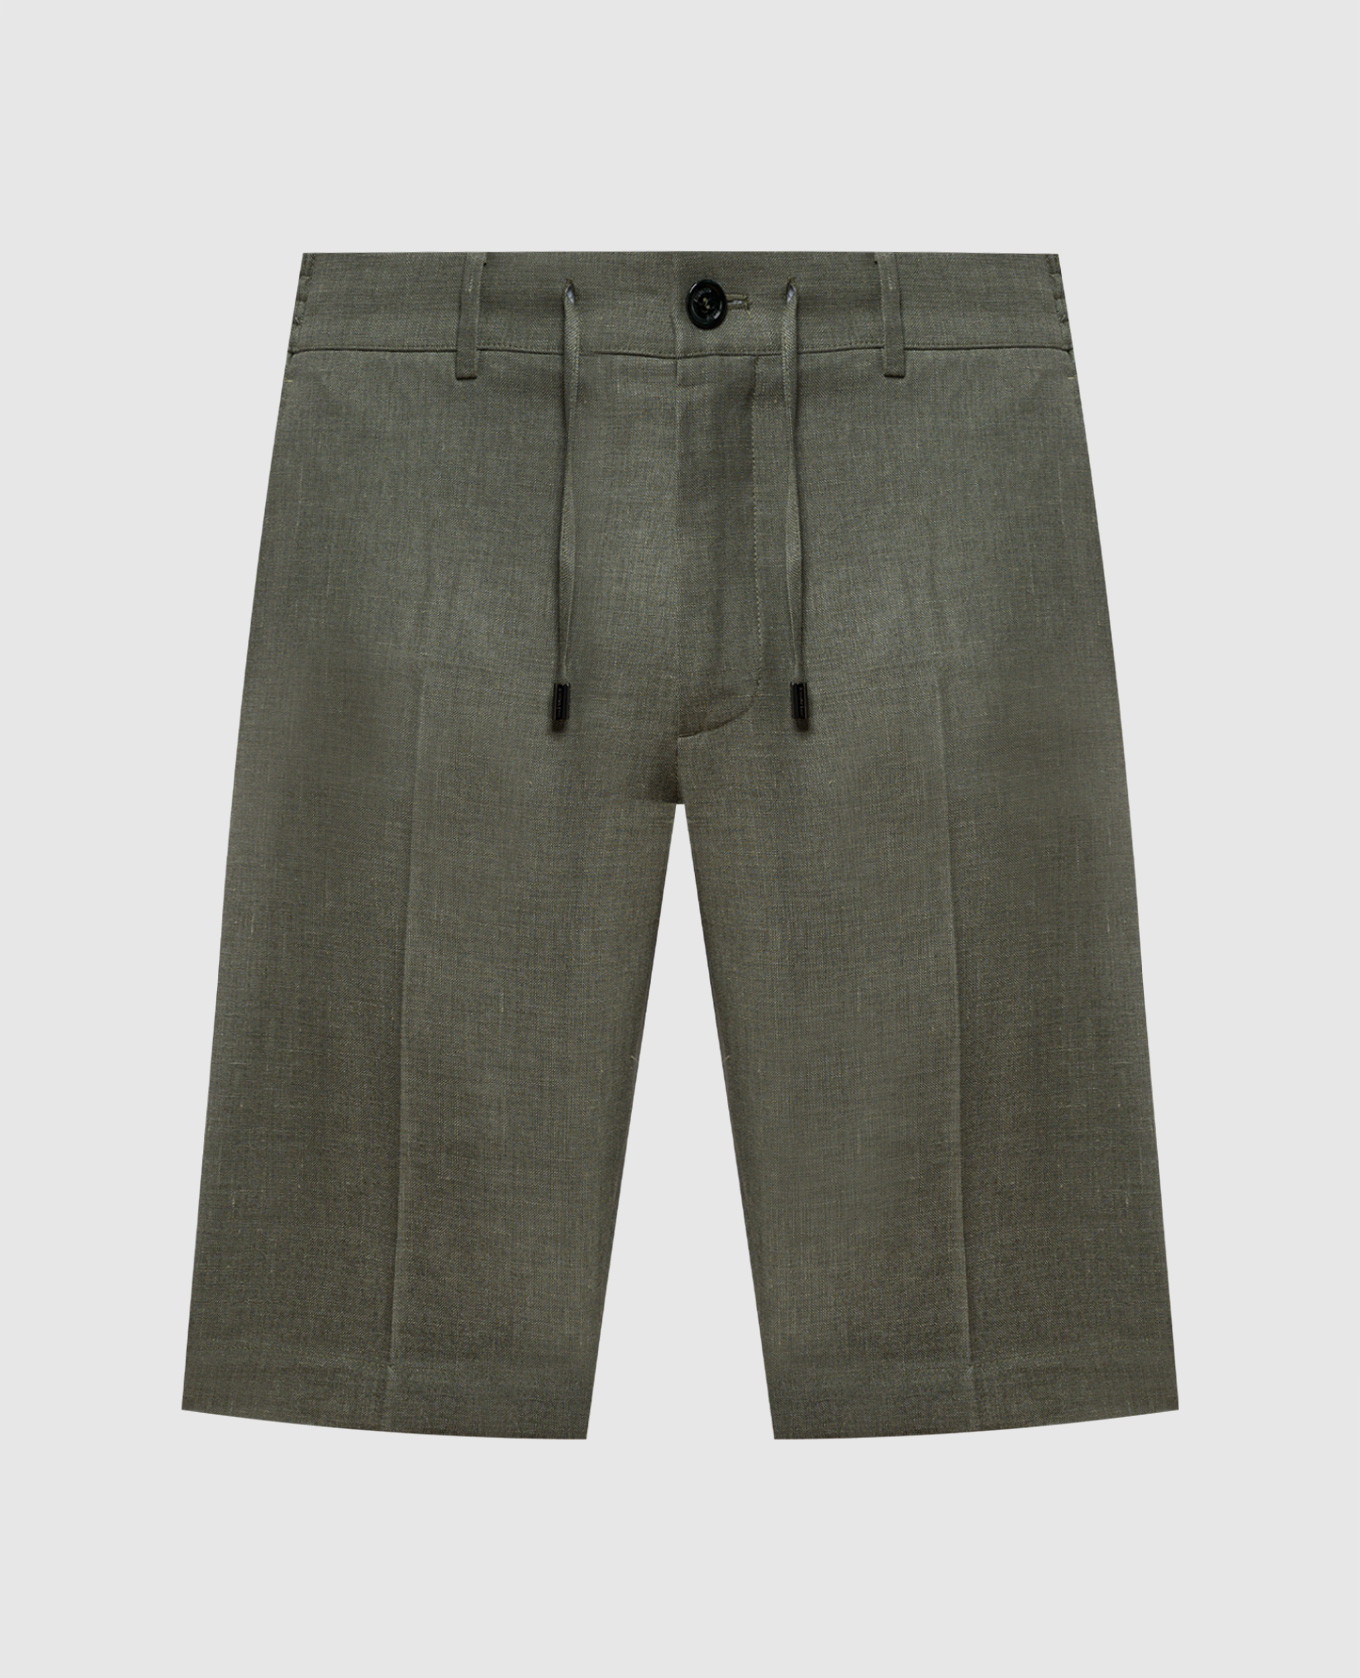 Green shorts with linen, wool and silk